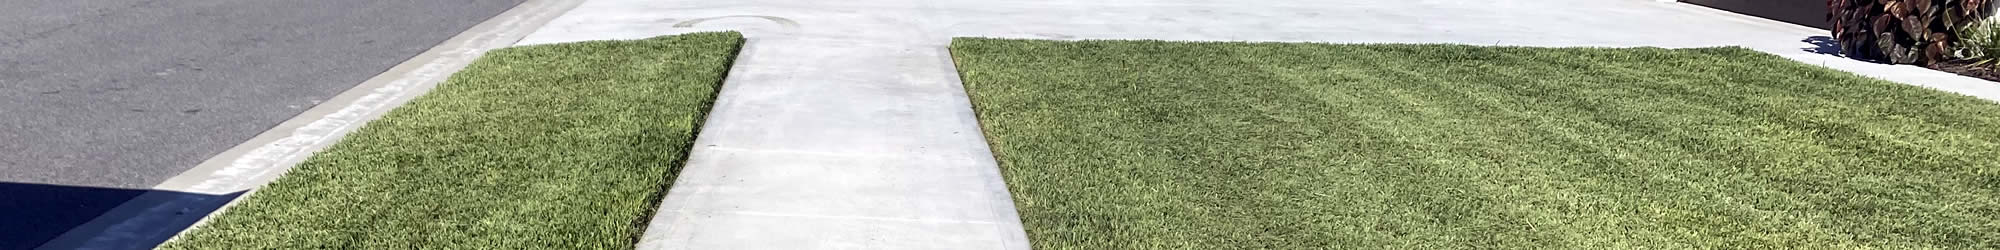 Lawn Edging Services near me